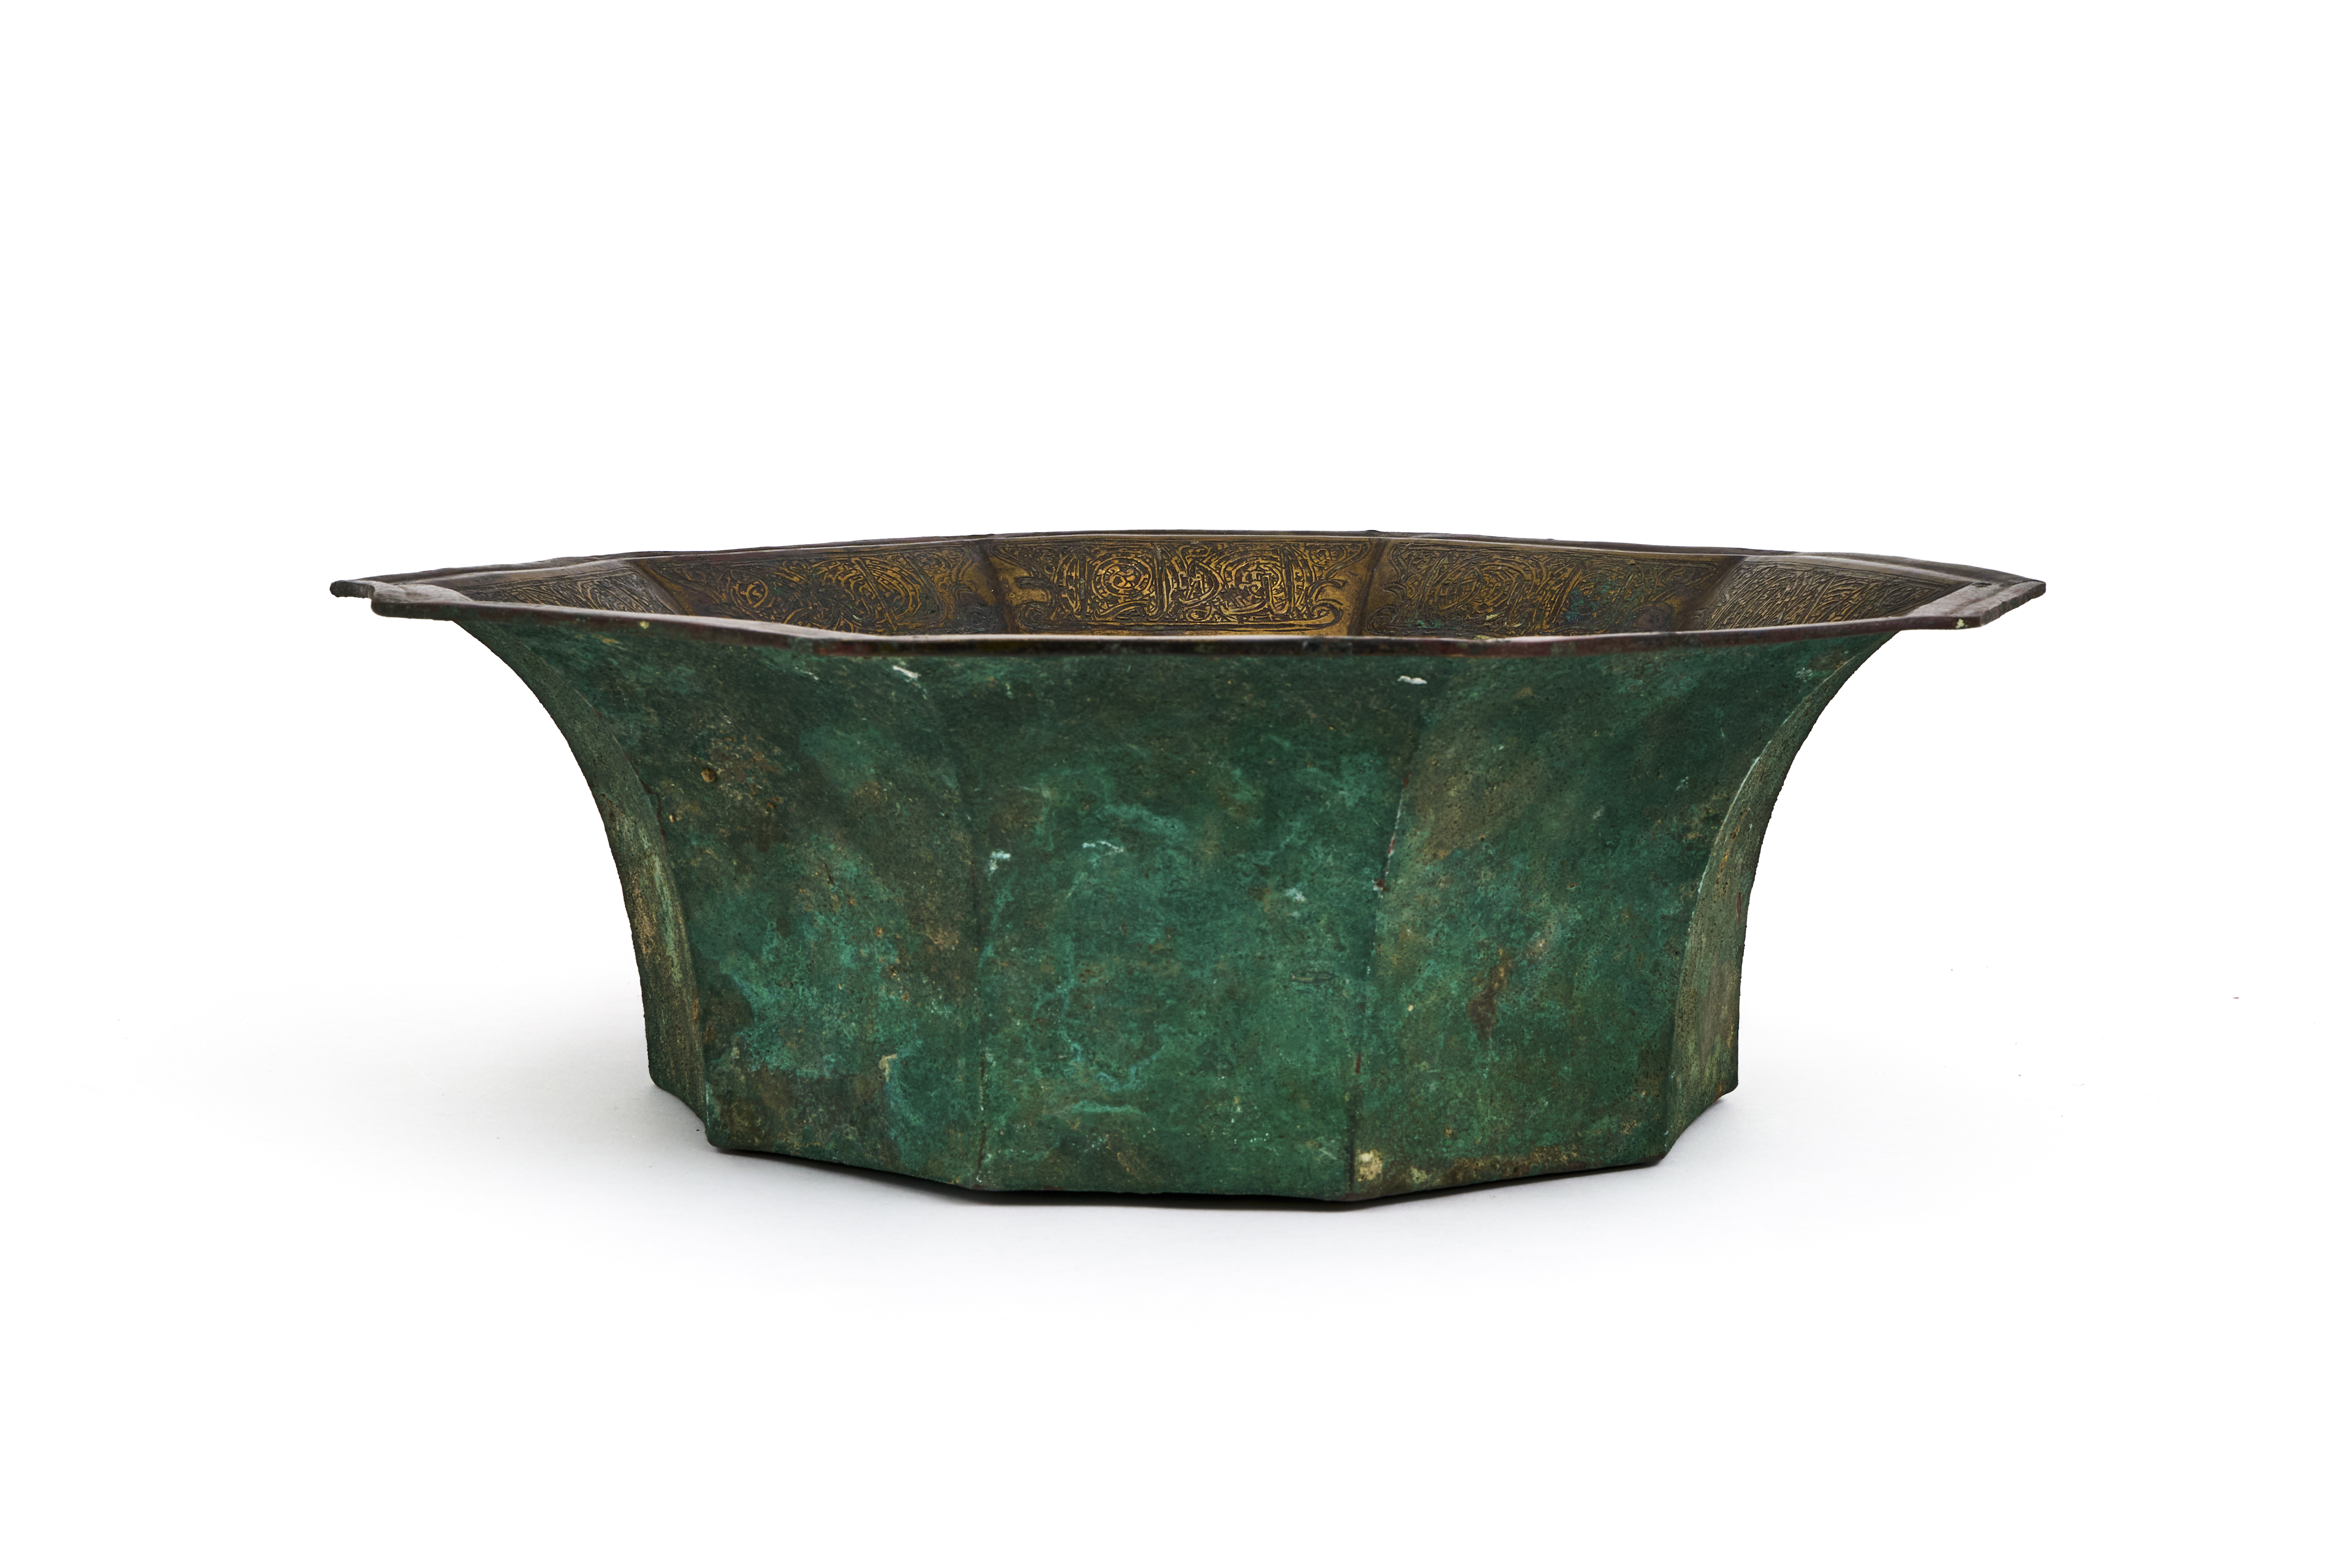 A LARGE KHORASSAN SILVER AND COPPER INLAID BRASS BASIN NORTH EAST IRAN, 12TH CENTURY - Image 2 of 4